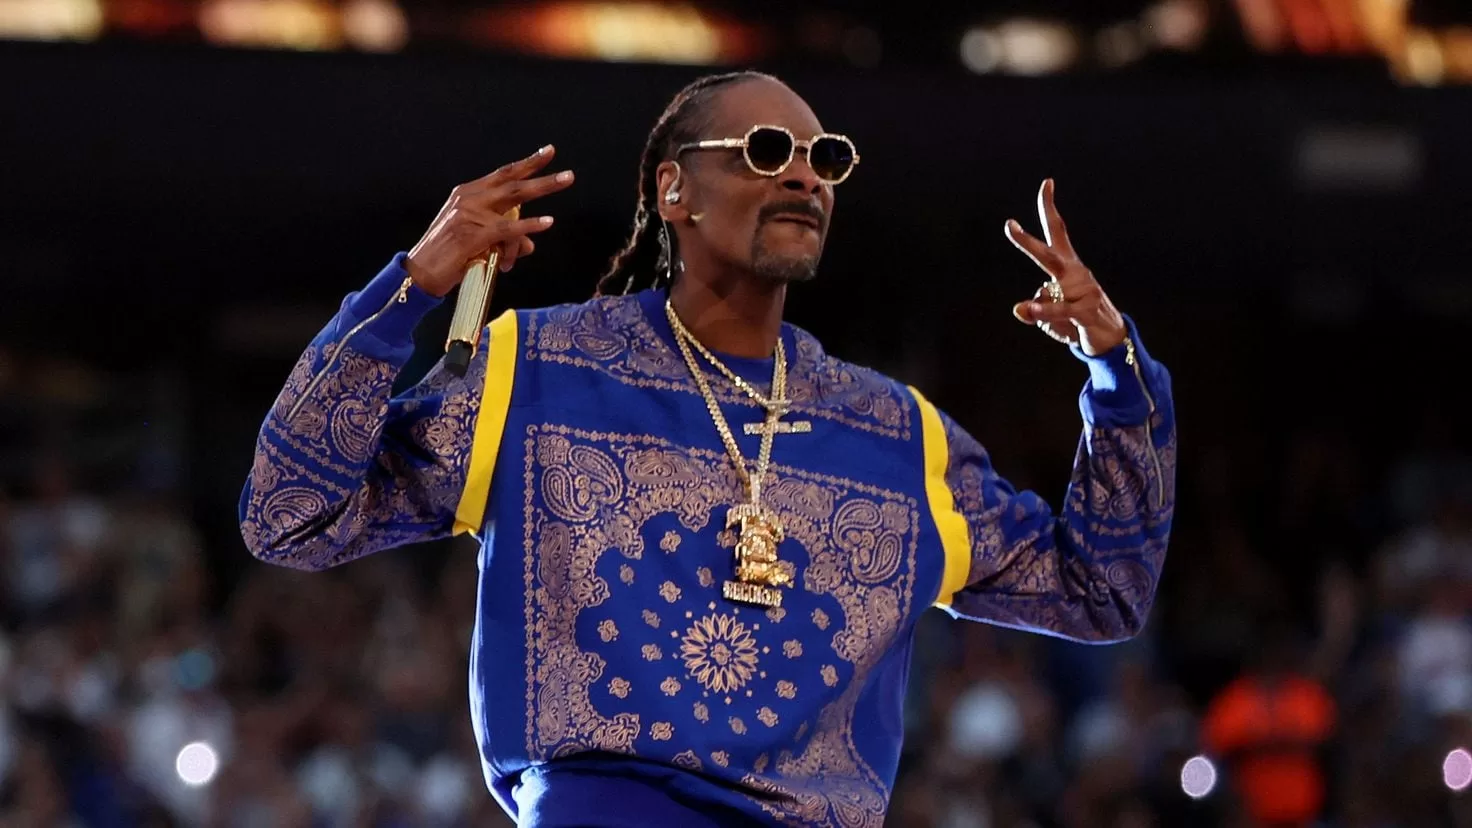 Snoop Dogg publicly announces that he is quitting marijuana
